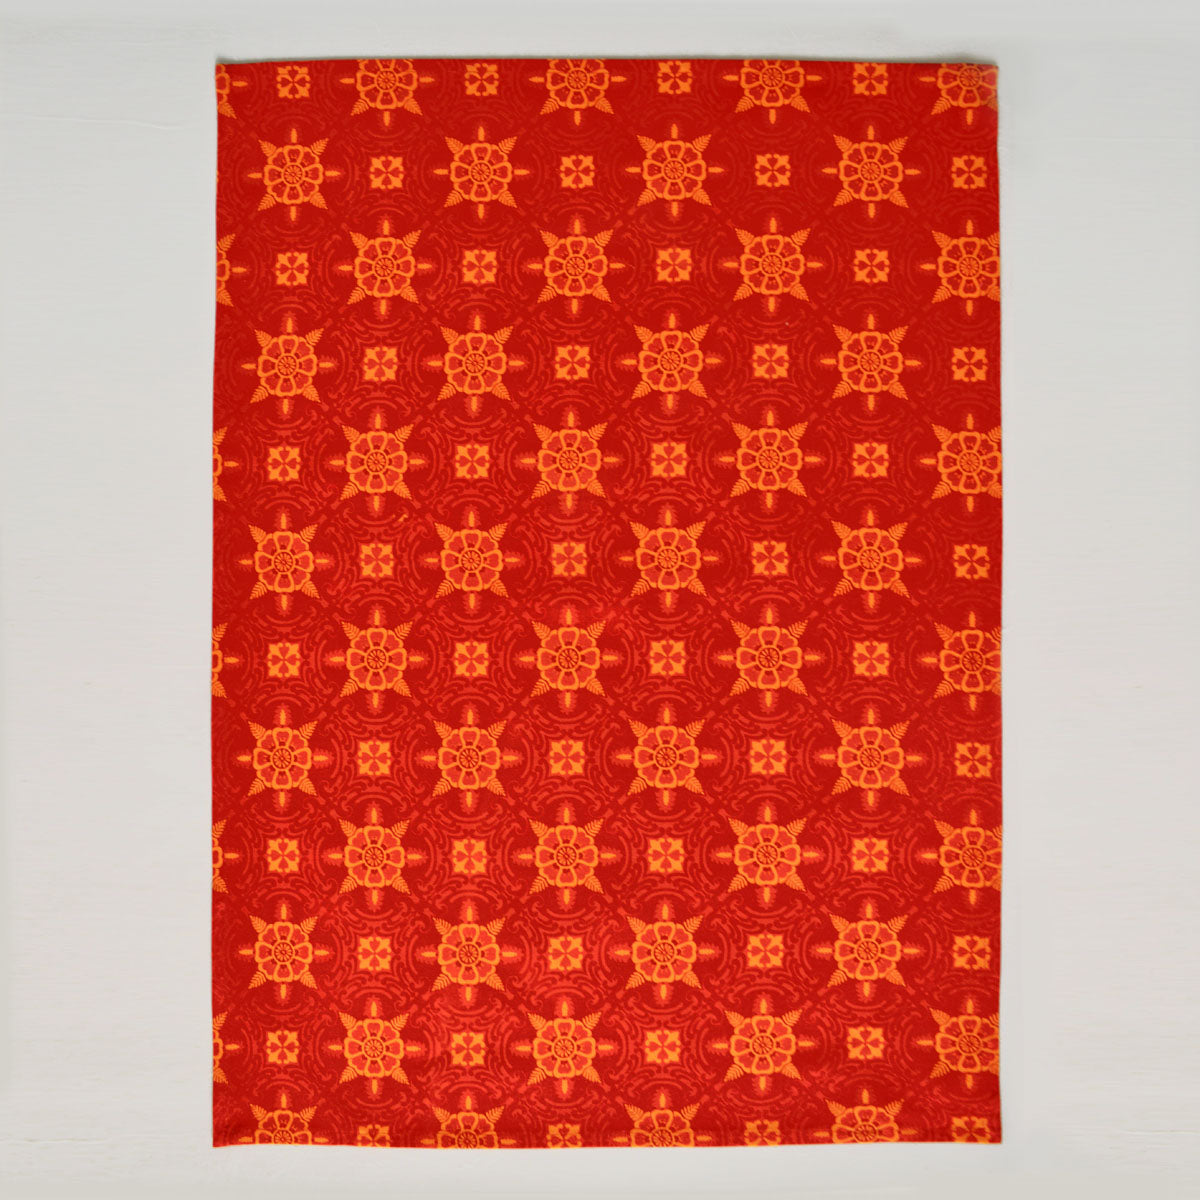 Kitchen towel - Bright red printed with talavera tile pattern